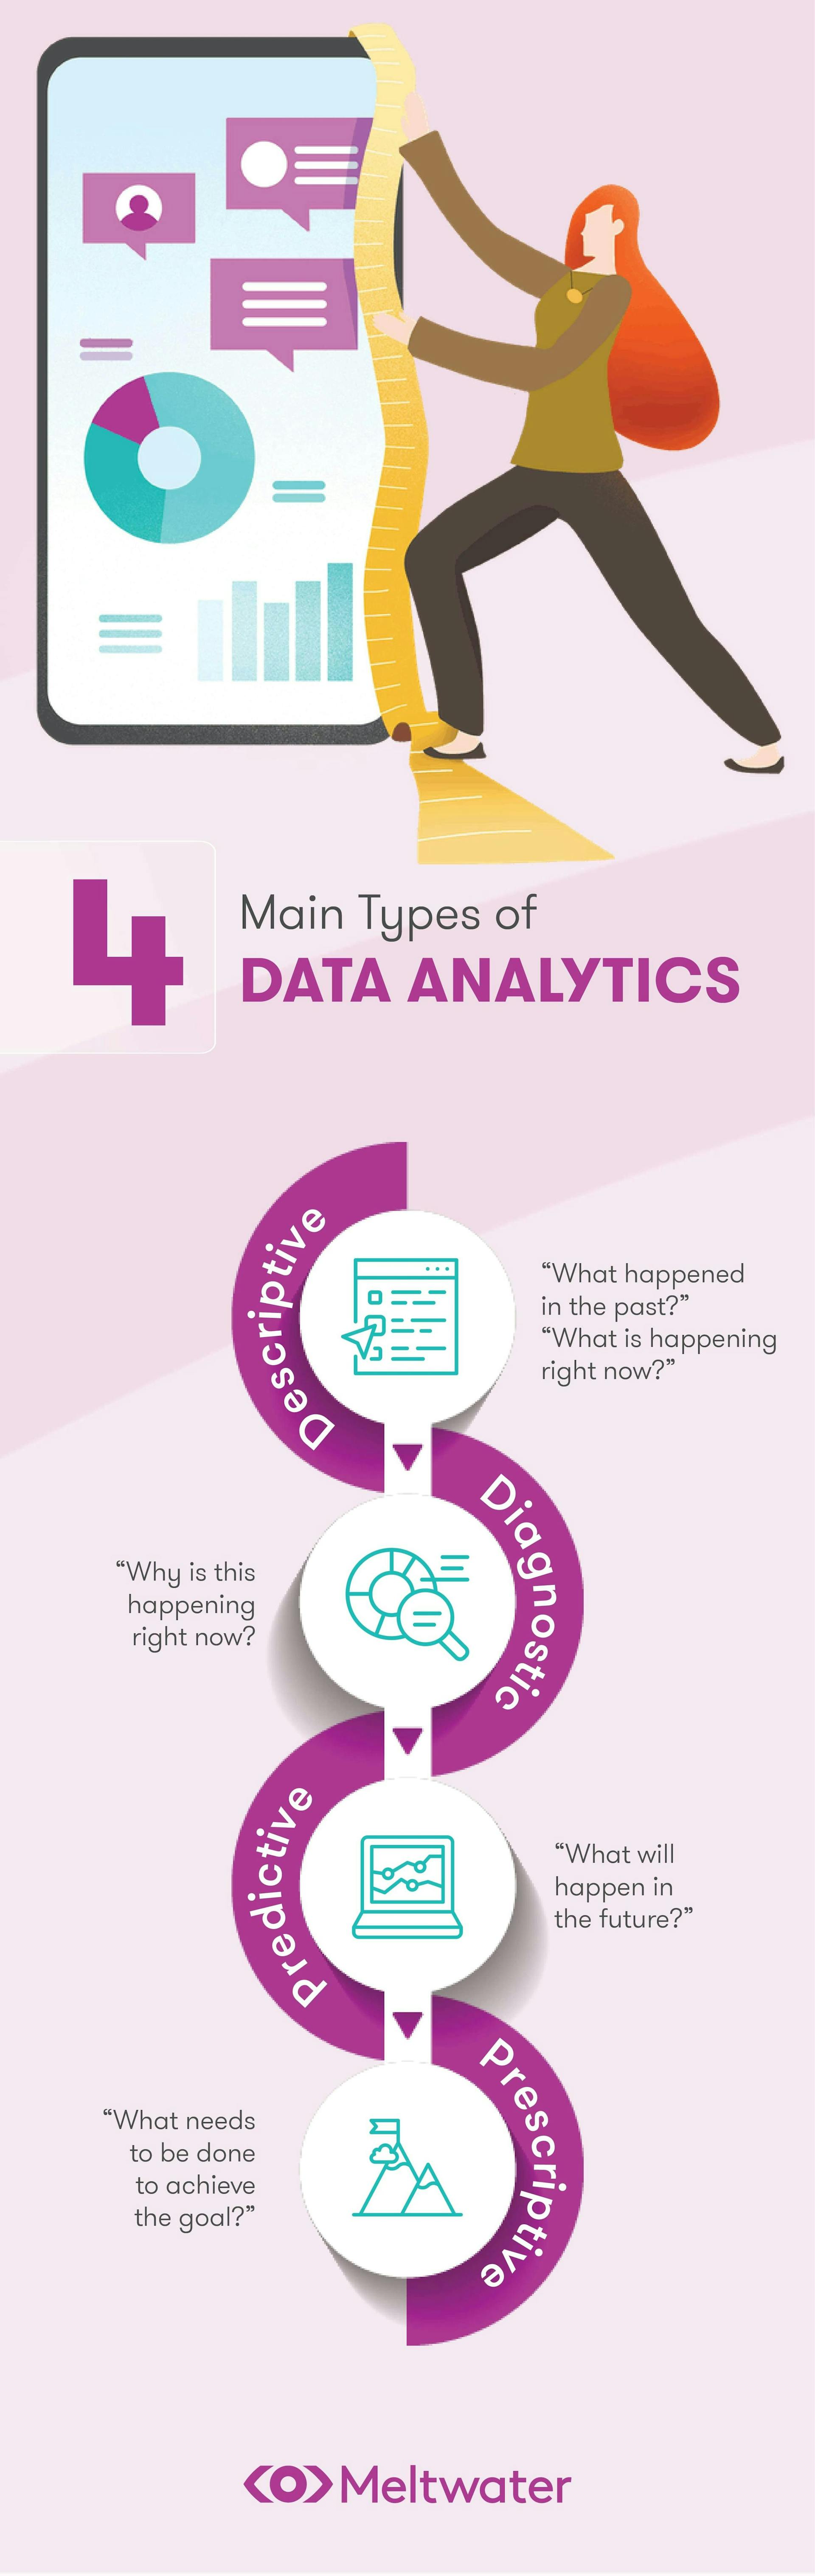 An infographic showing the four main types data analytics, the descriptive, diagnostic, predictive and prescriptive